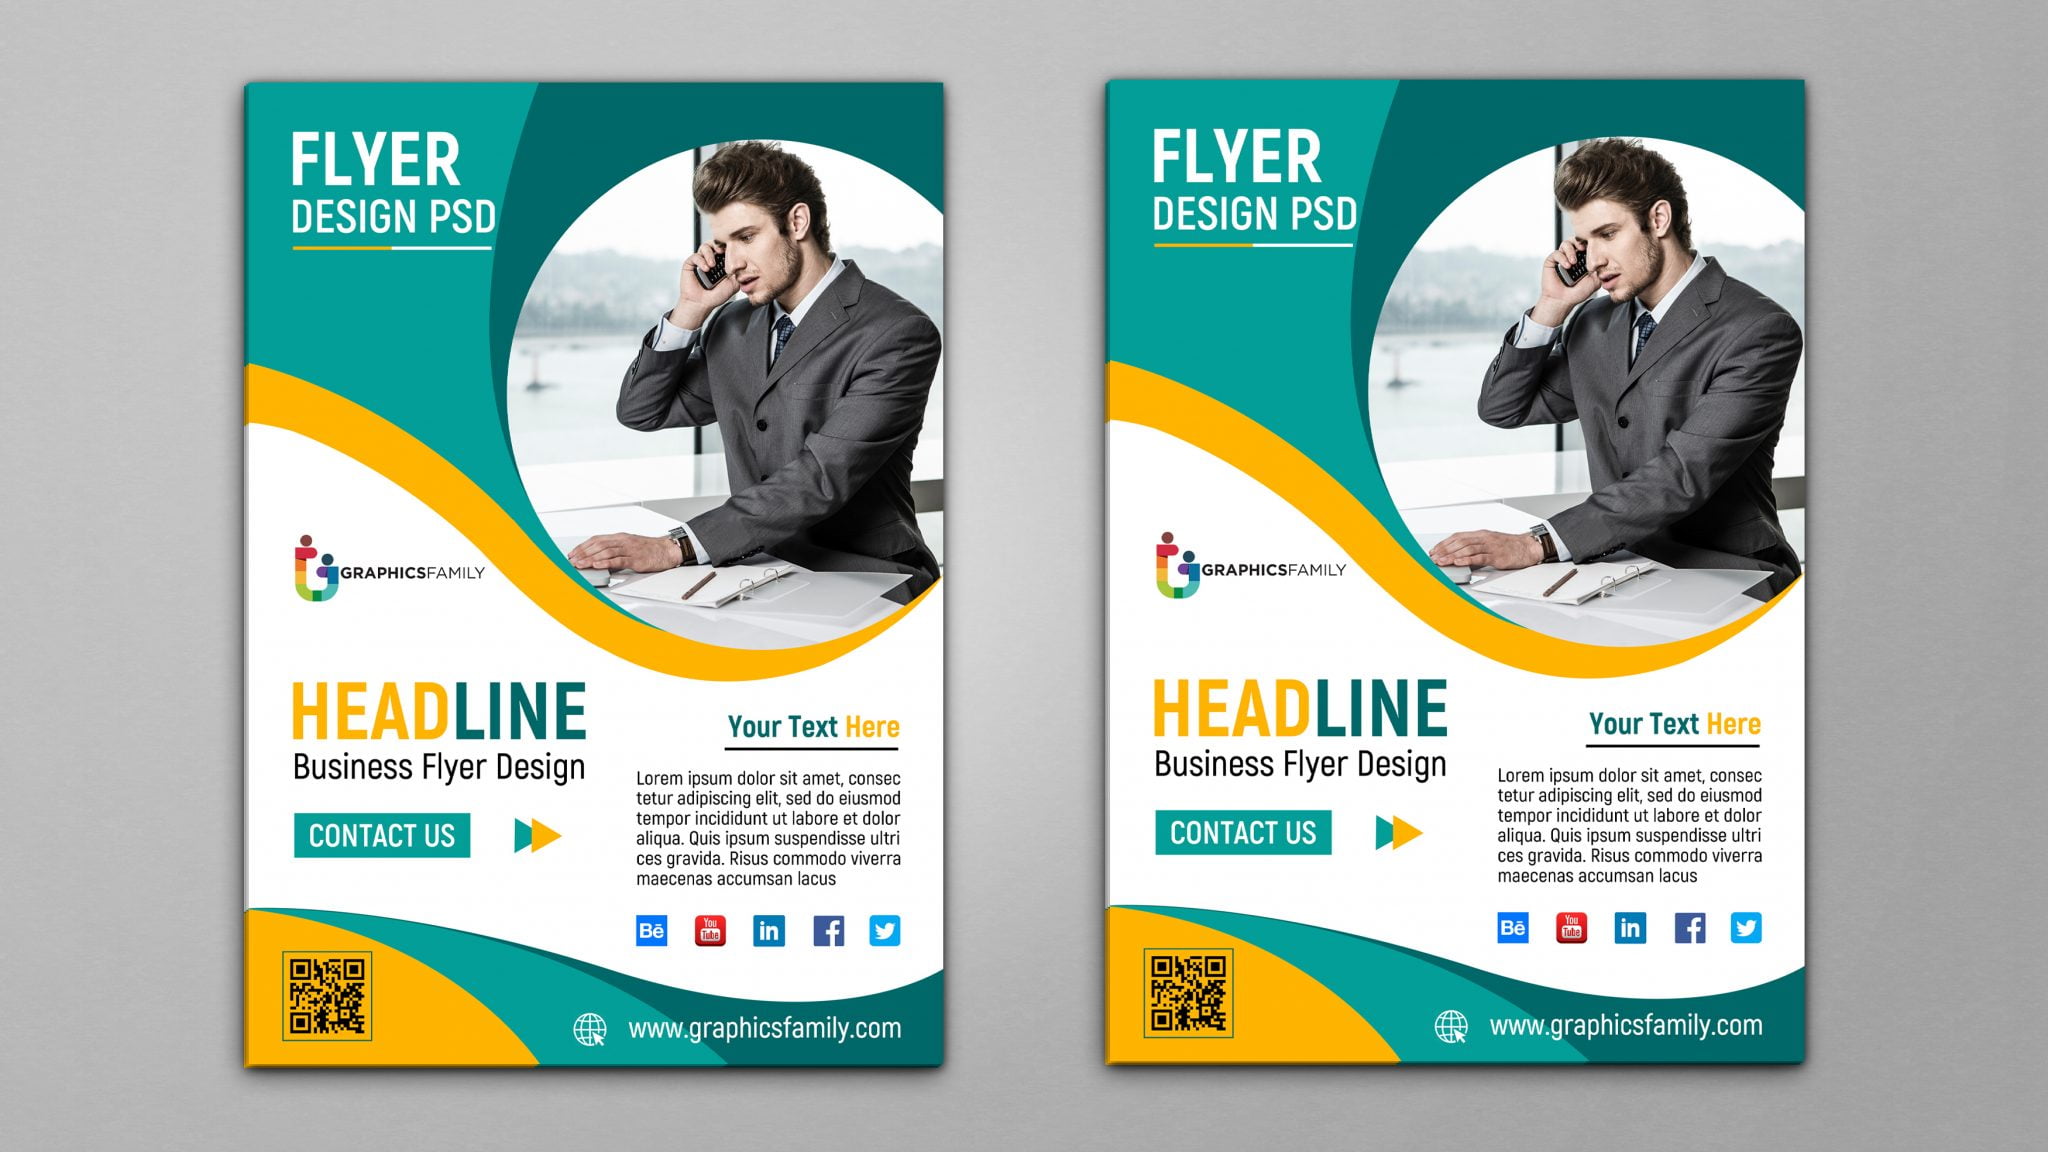 How To Design A Simple Flyer In Photoshop Design Talk